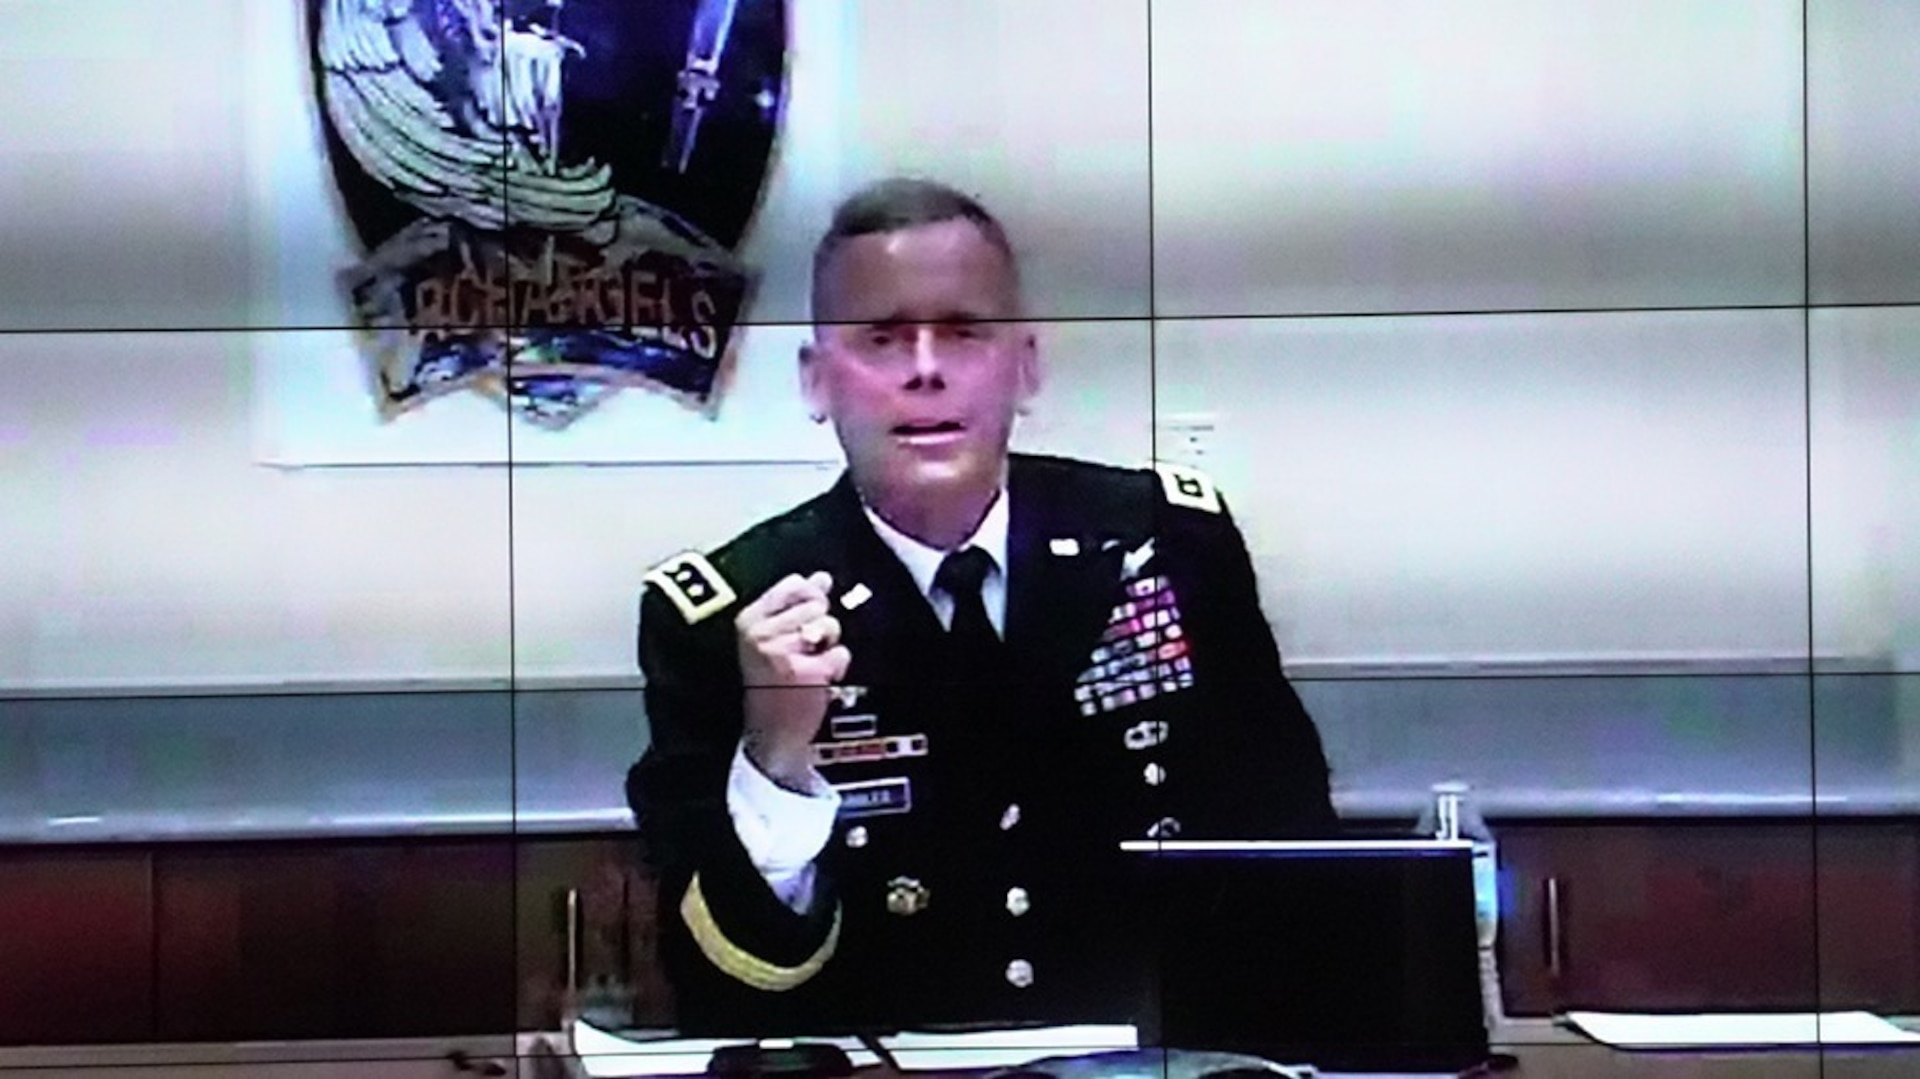 Army SMDC leader speaks at 2020 Virtual Fires Conference > United